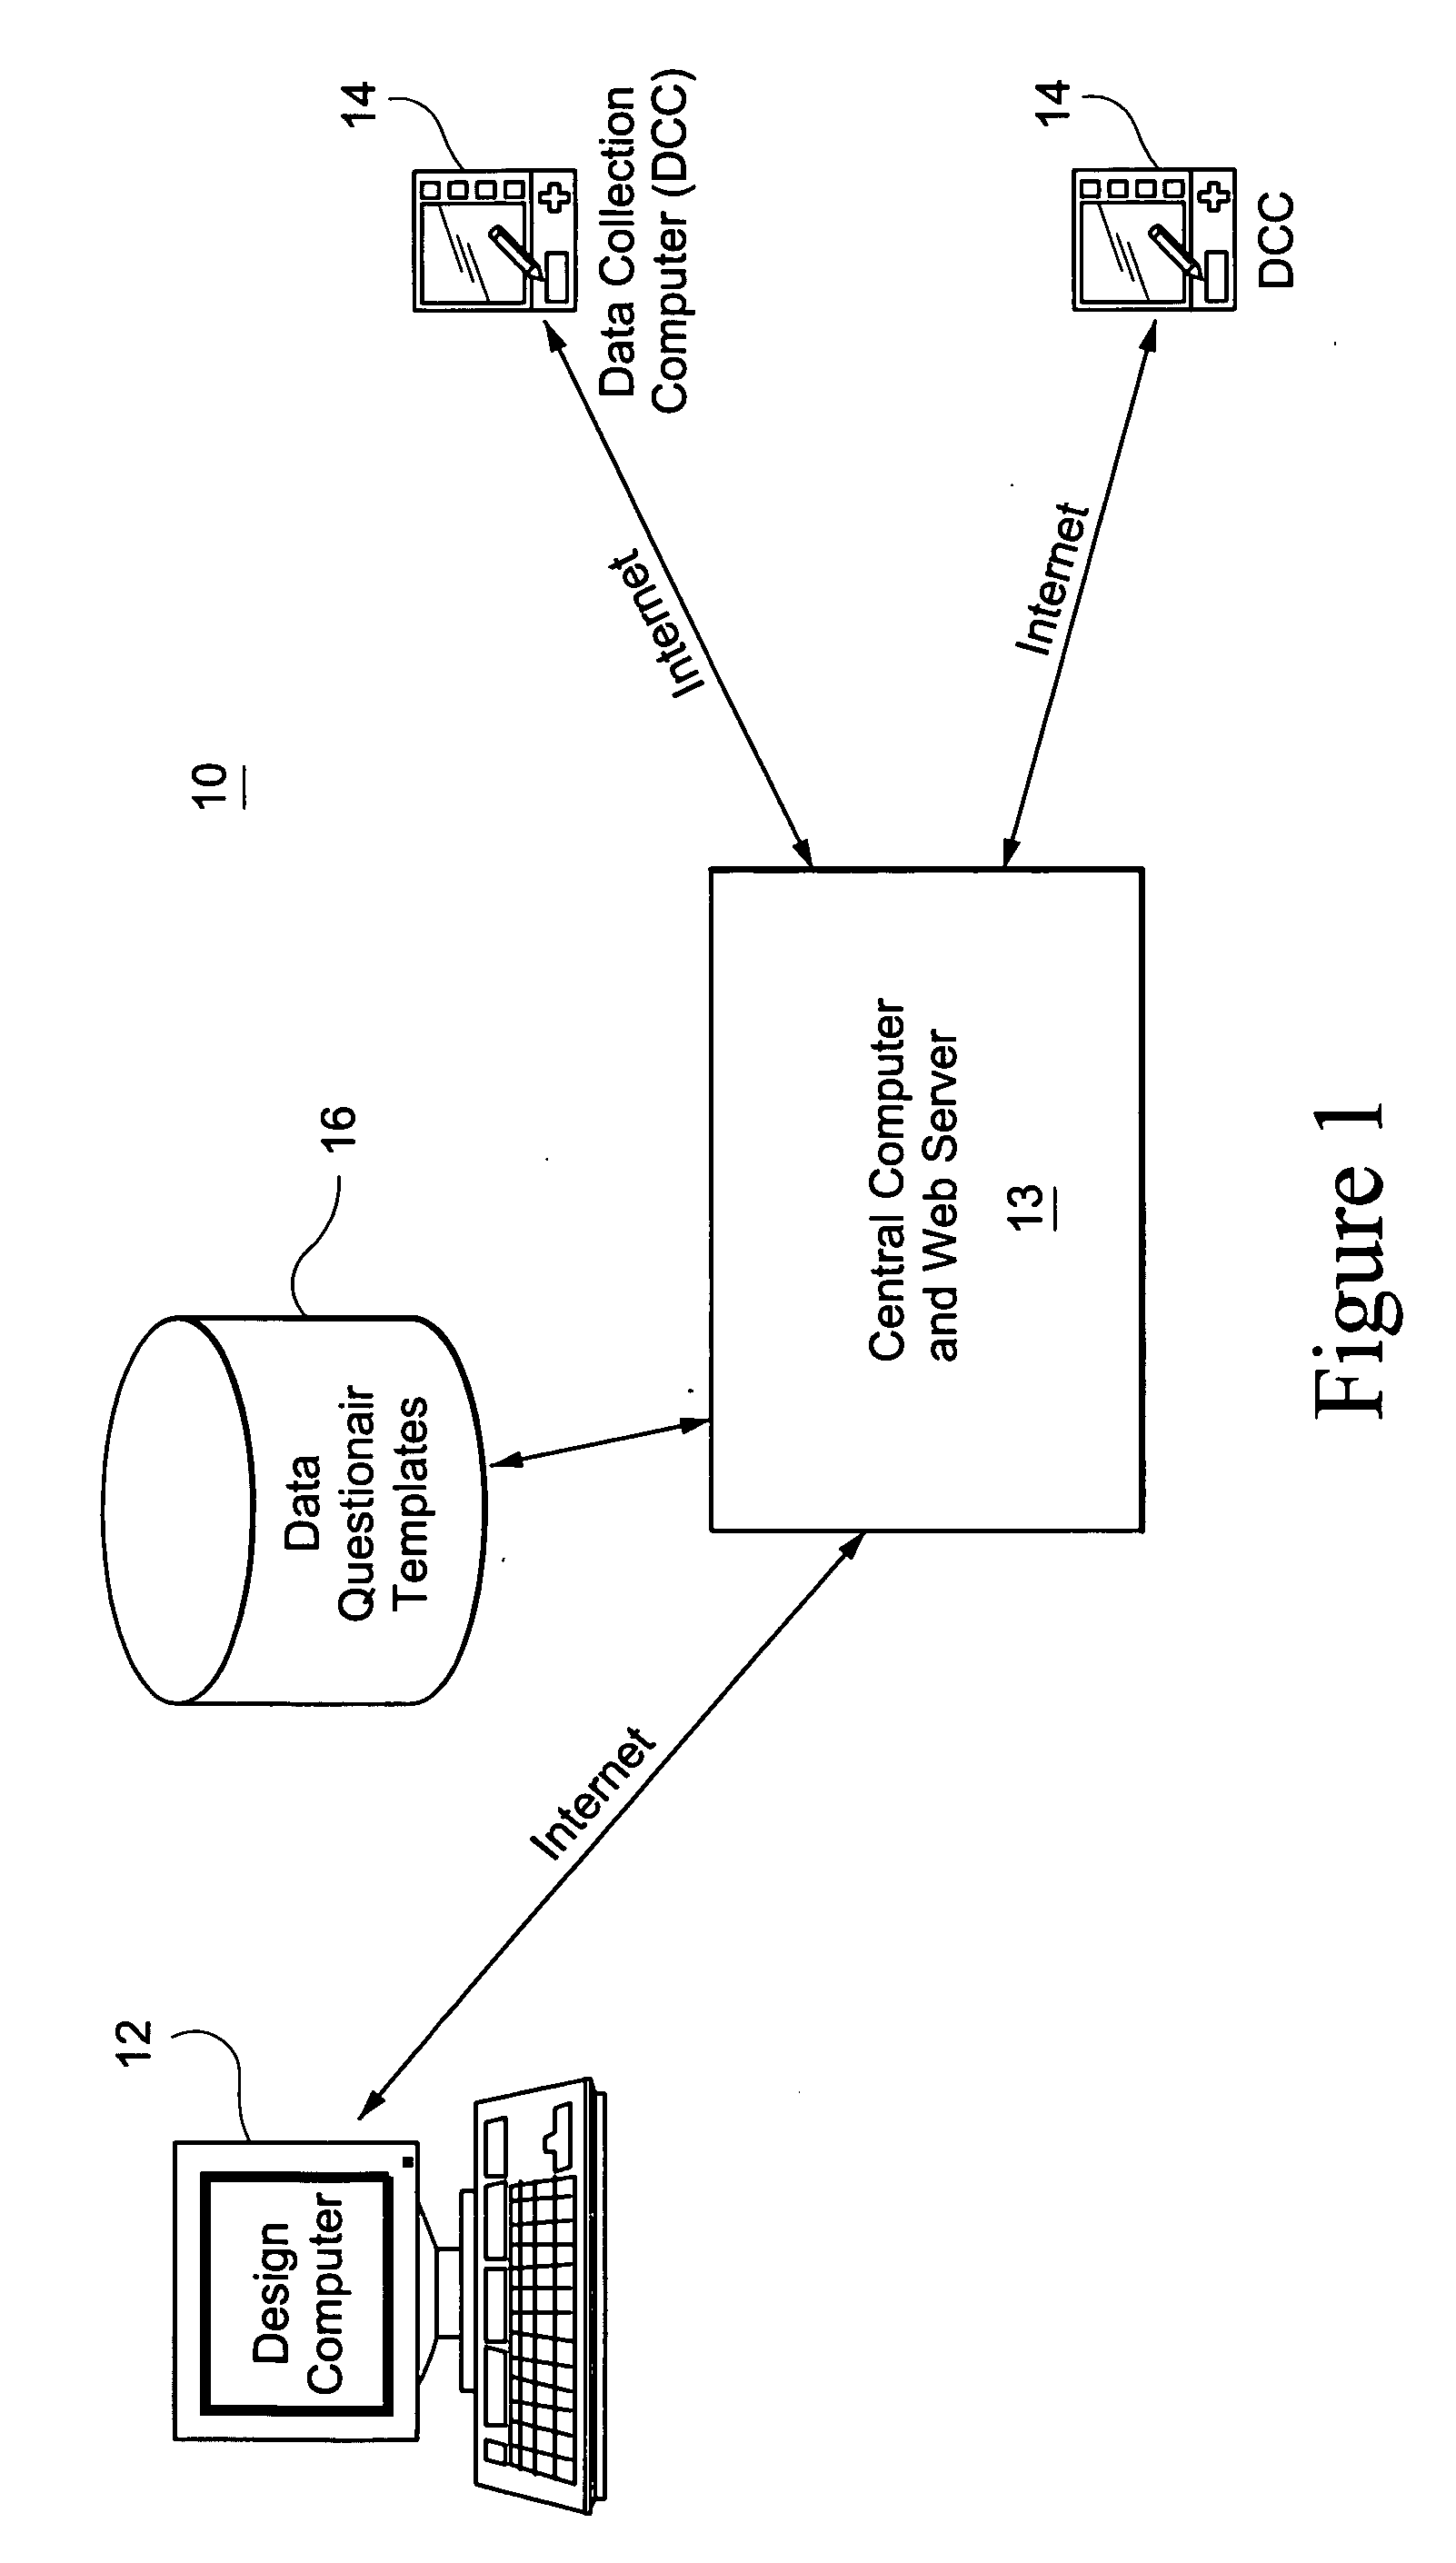 Automated system and method to develop computer-administered research questionnaires using a virtual questionnaire model